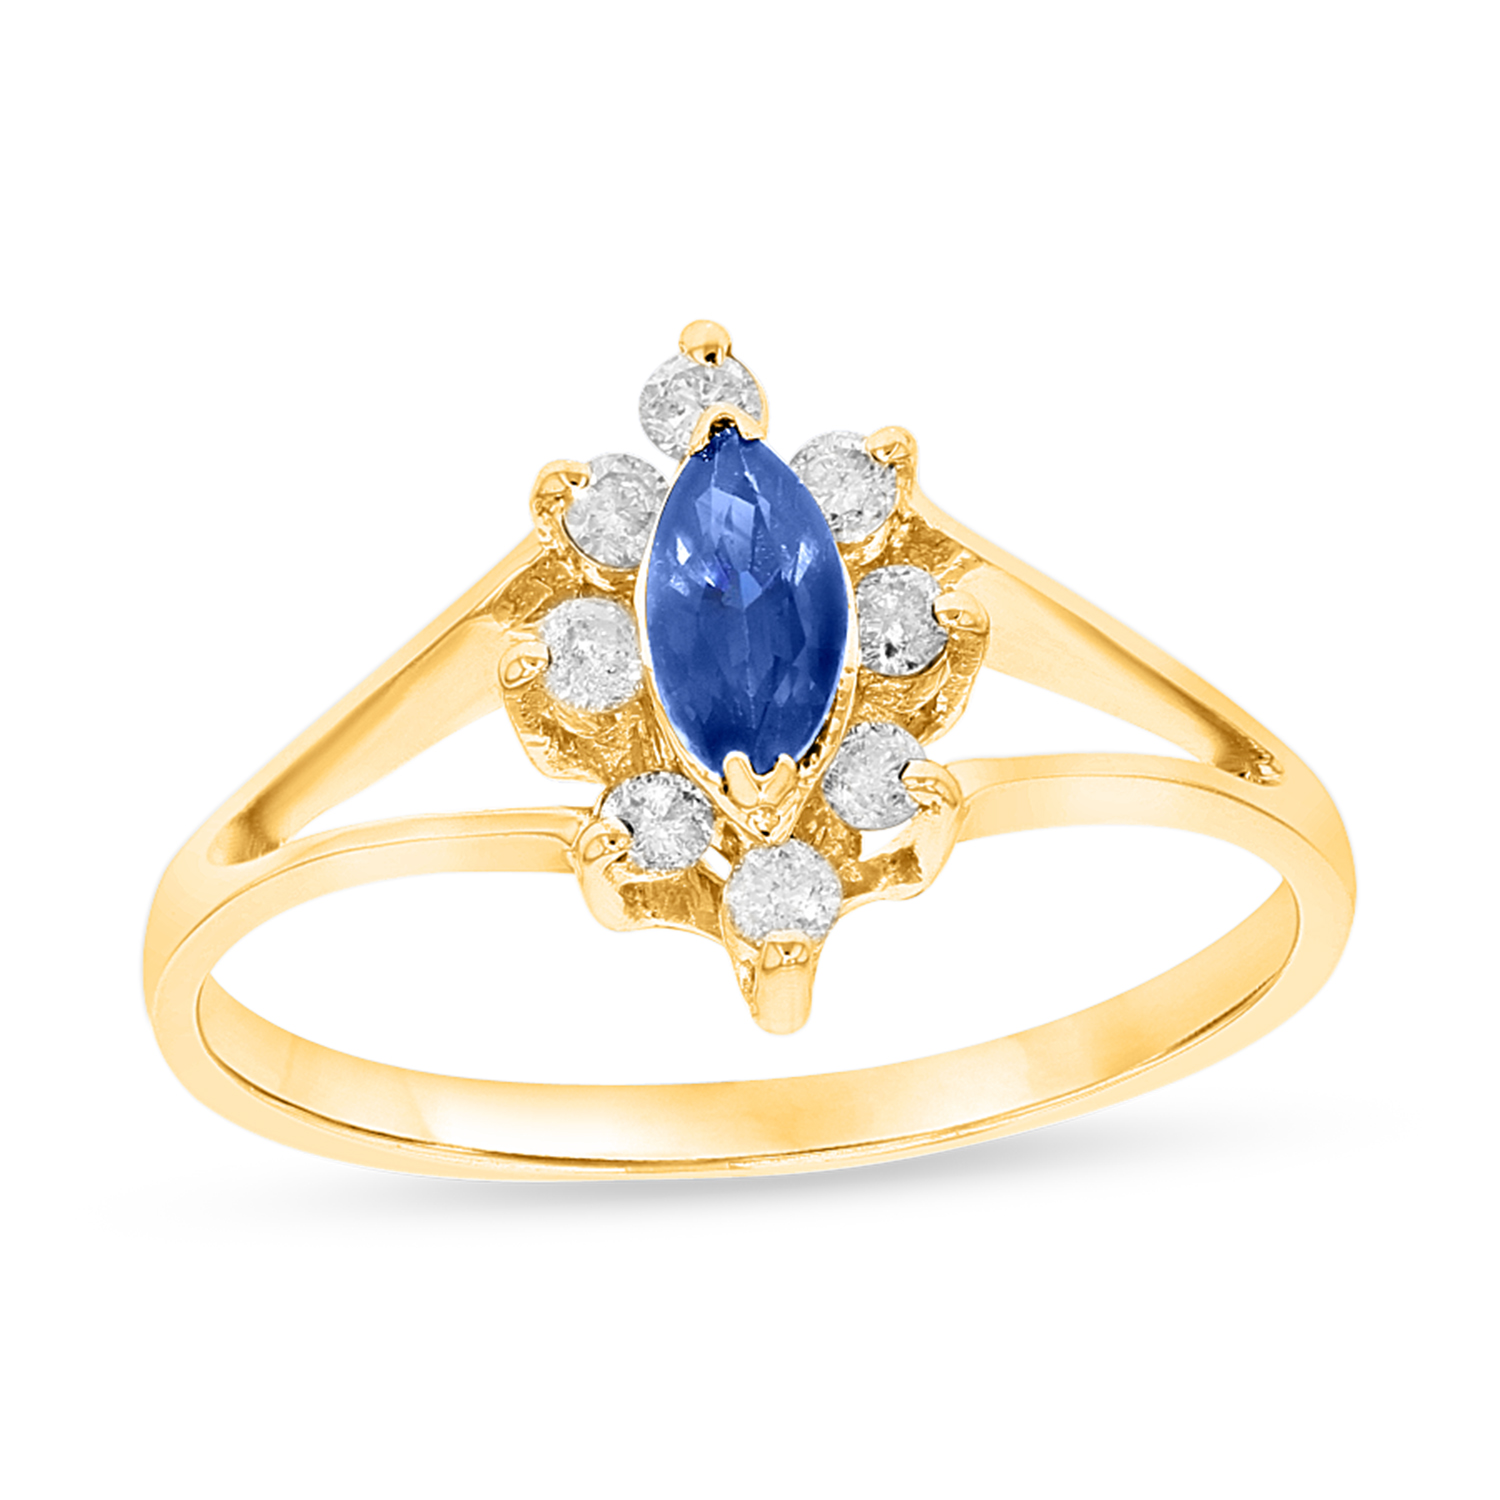 View 0.40ctw Diamond and Sapphire Marquis Ring in 14k Yellow Gold